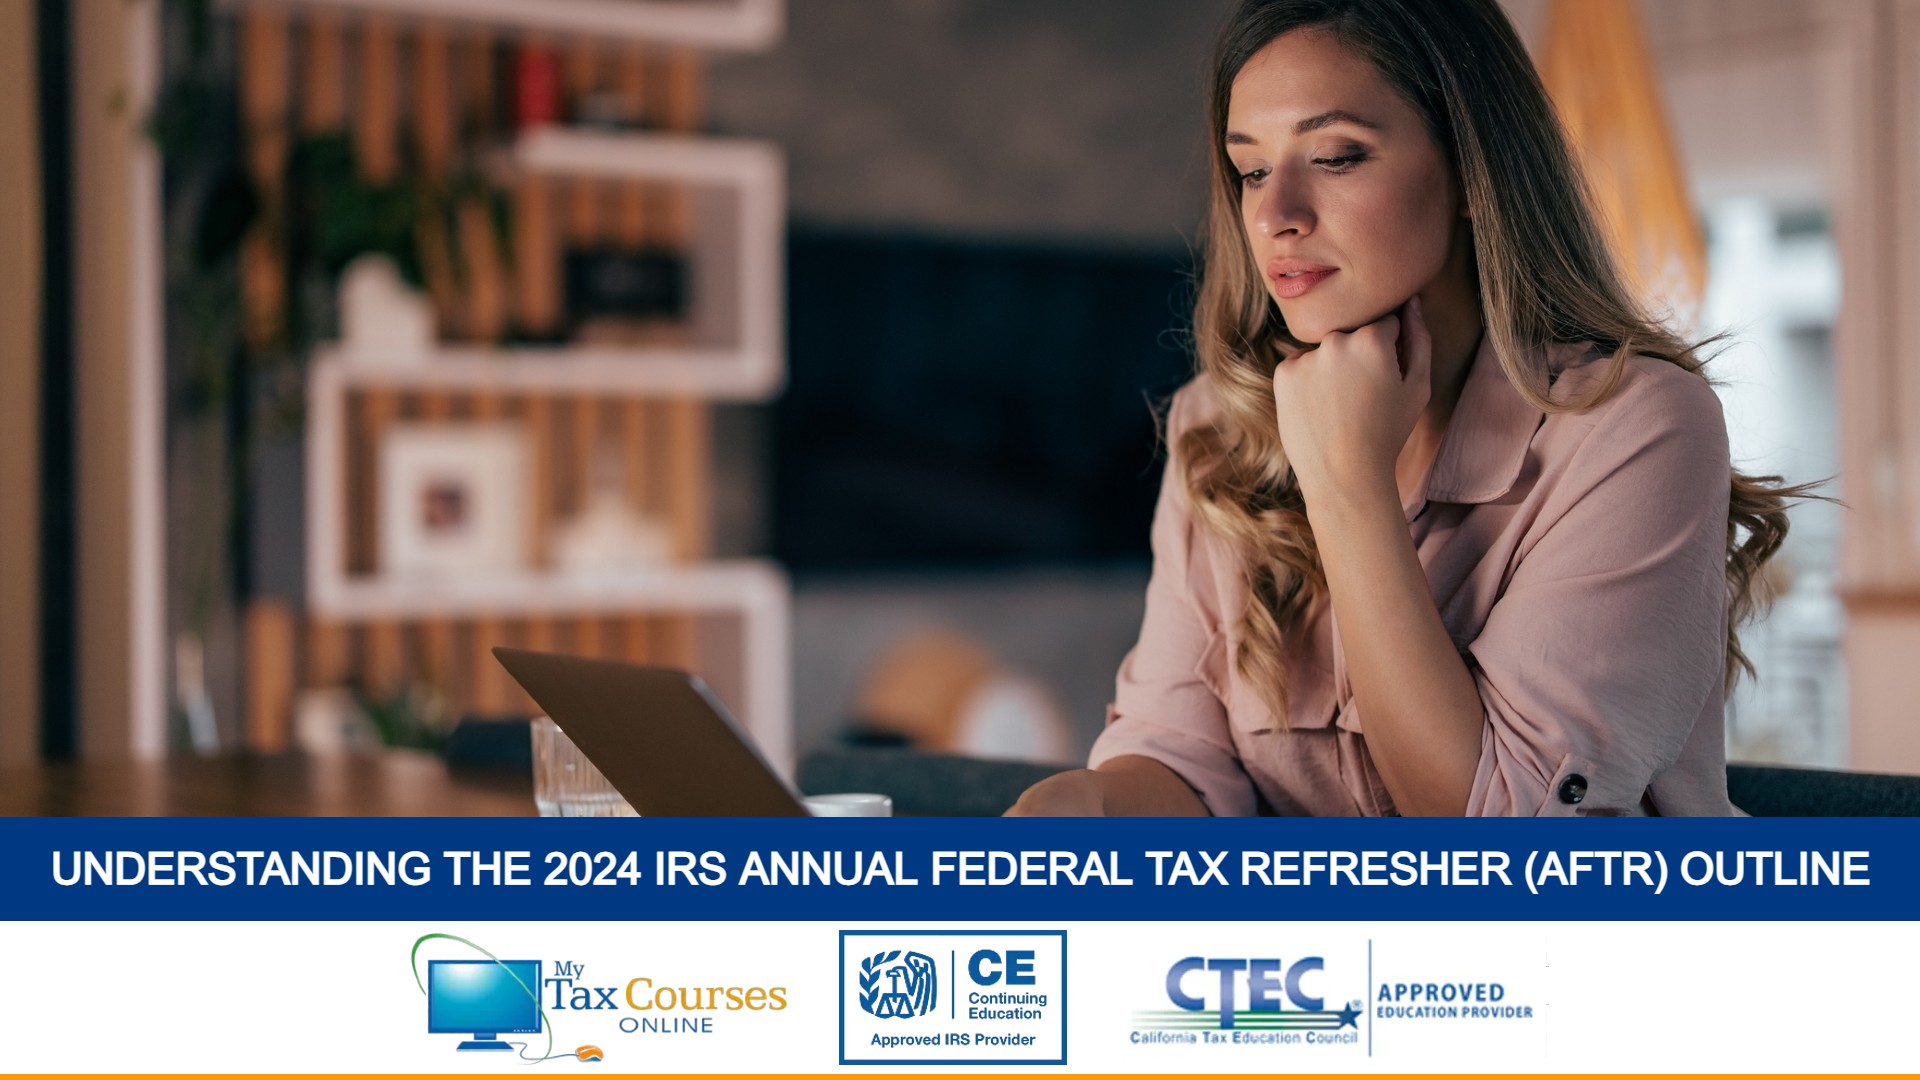 Understanding The 2024 IRS Annual Federal Tax Refresher (AFTR) Outline